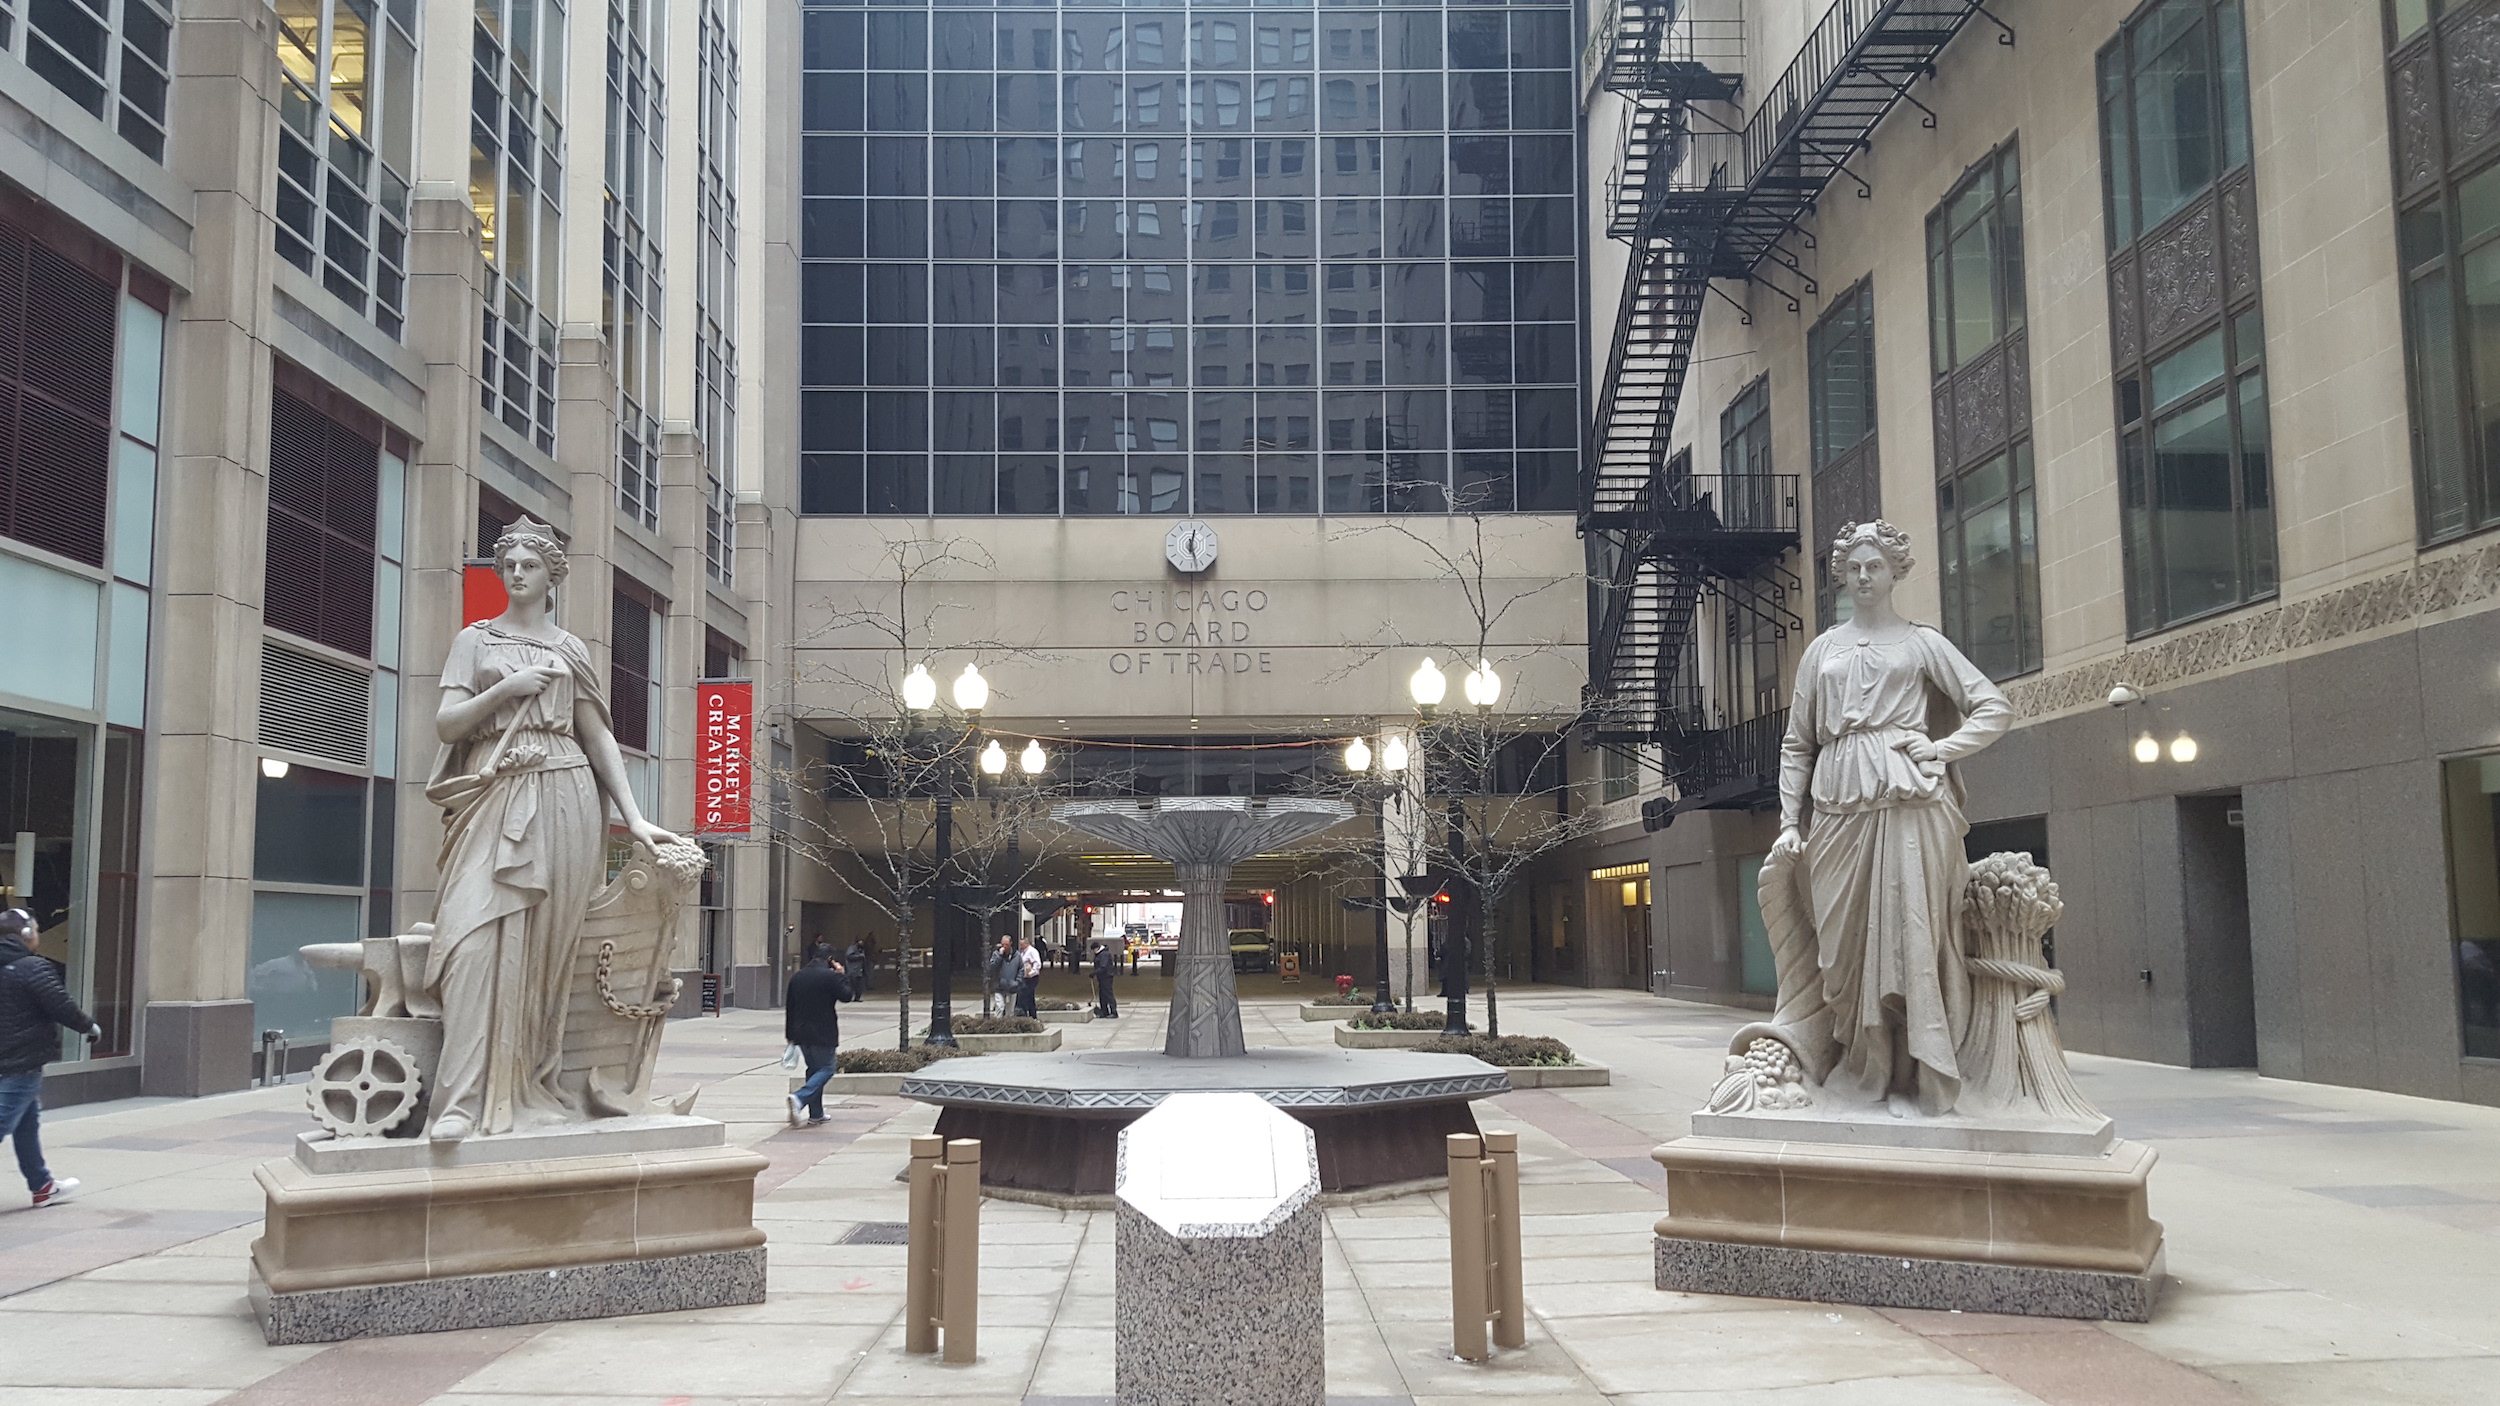 visit the Chicago board of trade lost statues